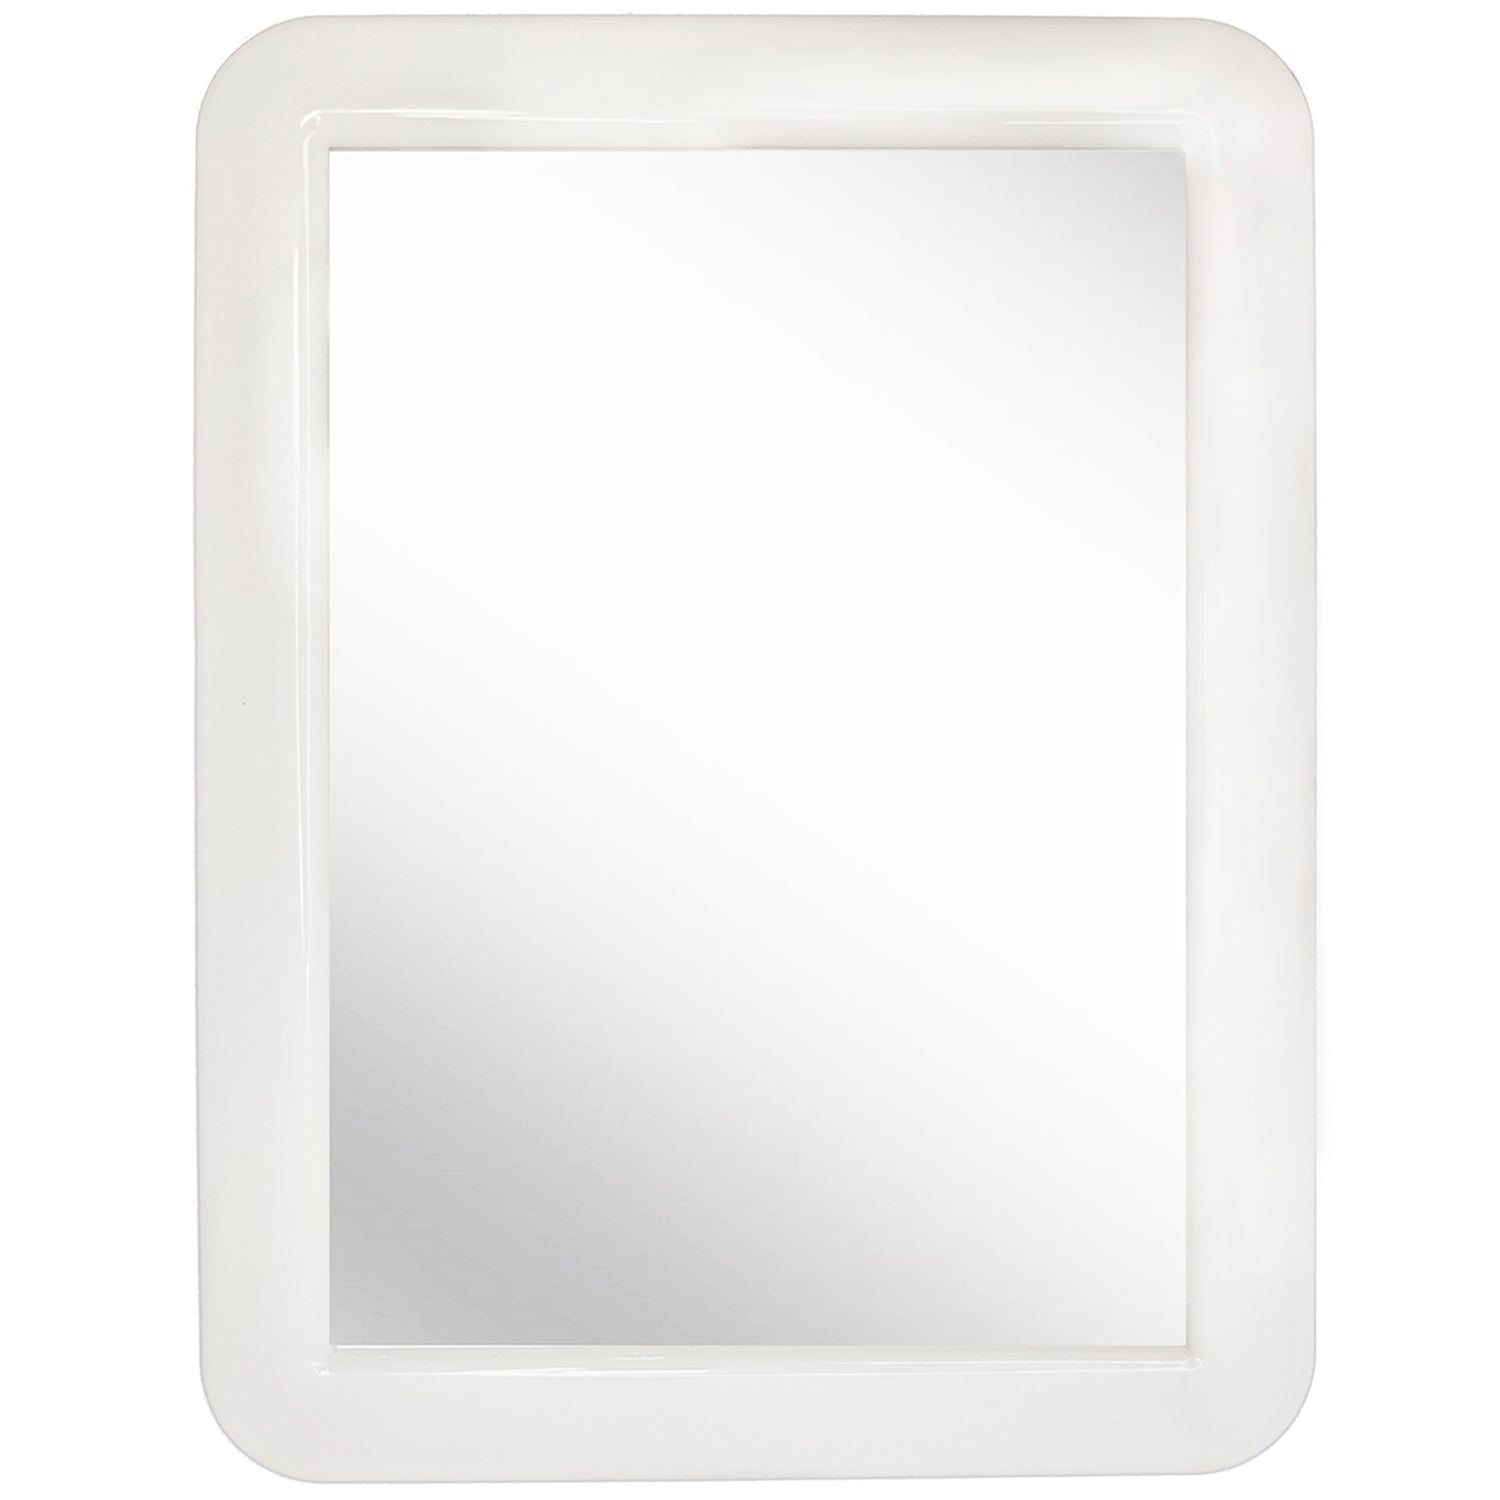 Cerem Magnetic Locker Mirror, White 5 inch x 7 inch - Real Glass Make-Up Mirror - Locker Accessory for School, Home, Gym, Office, Size: 5 x 7